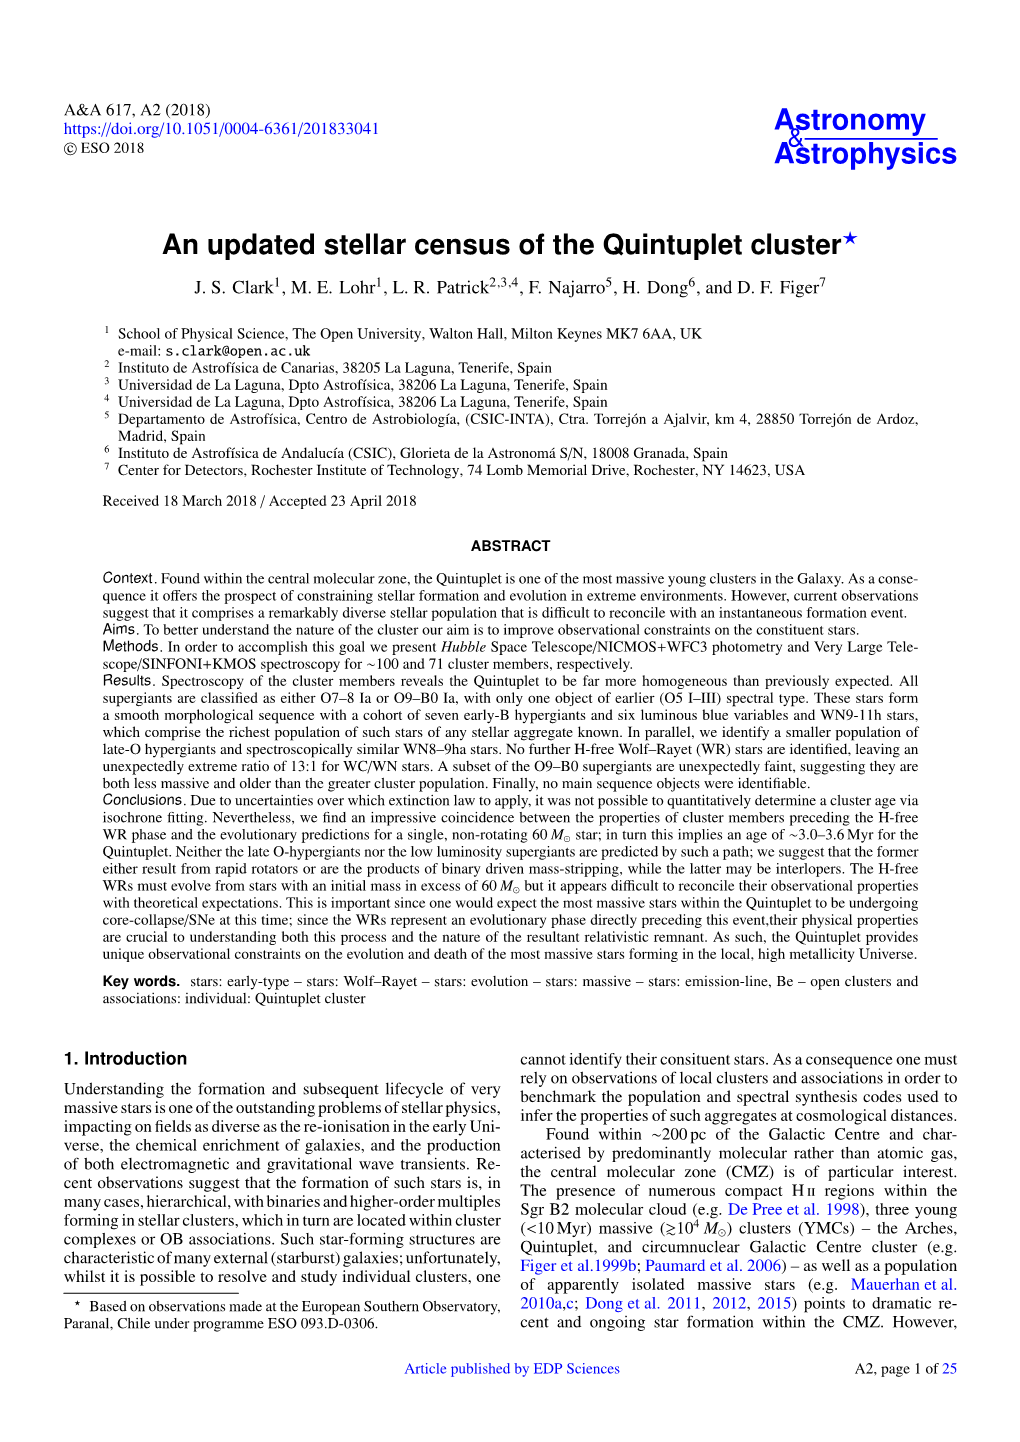 An Updated Stellar Census of the Quintuplet Cluster? J